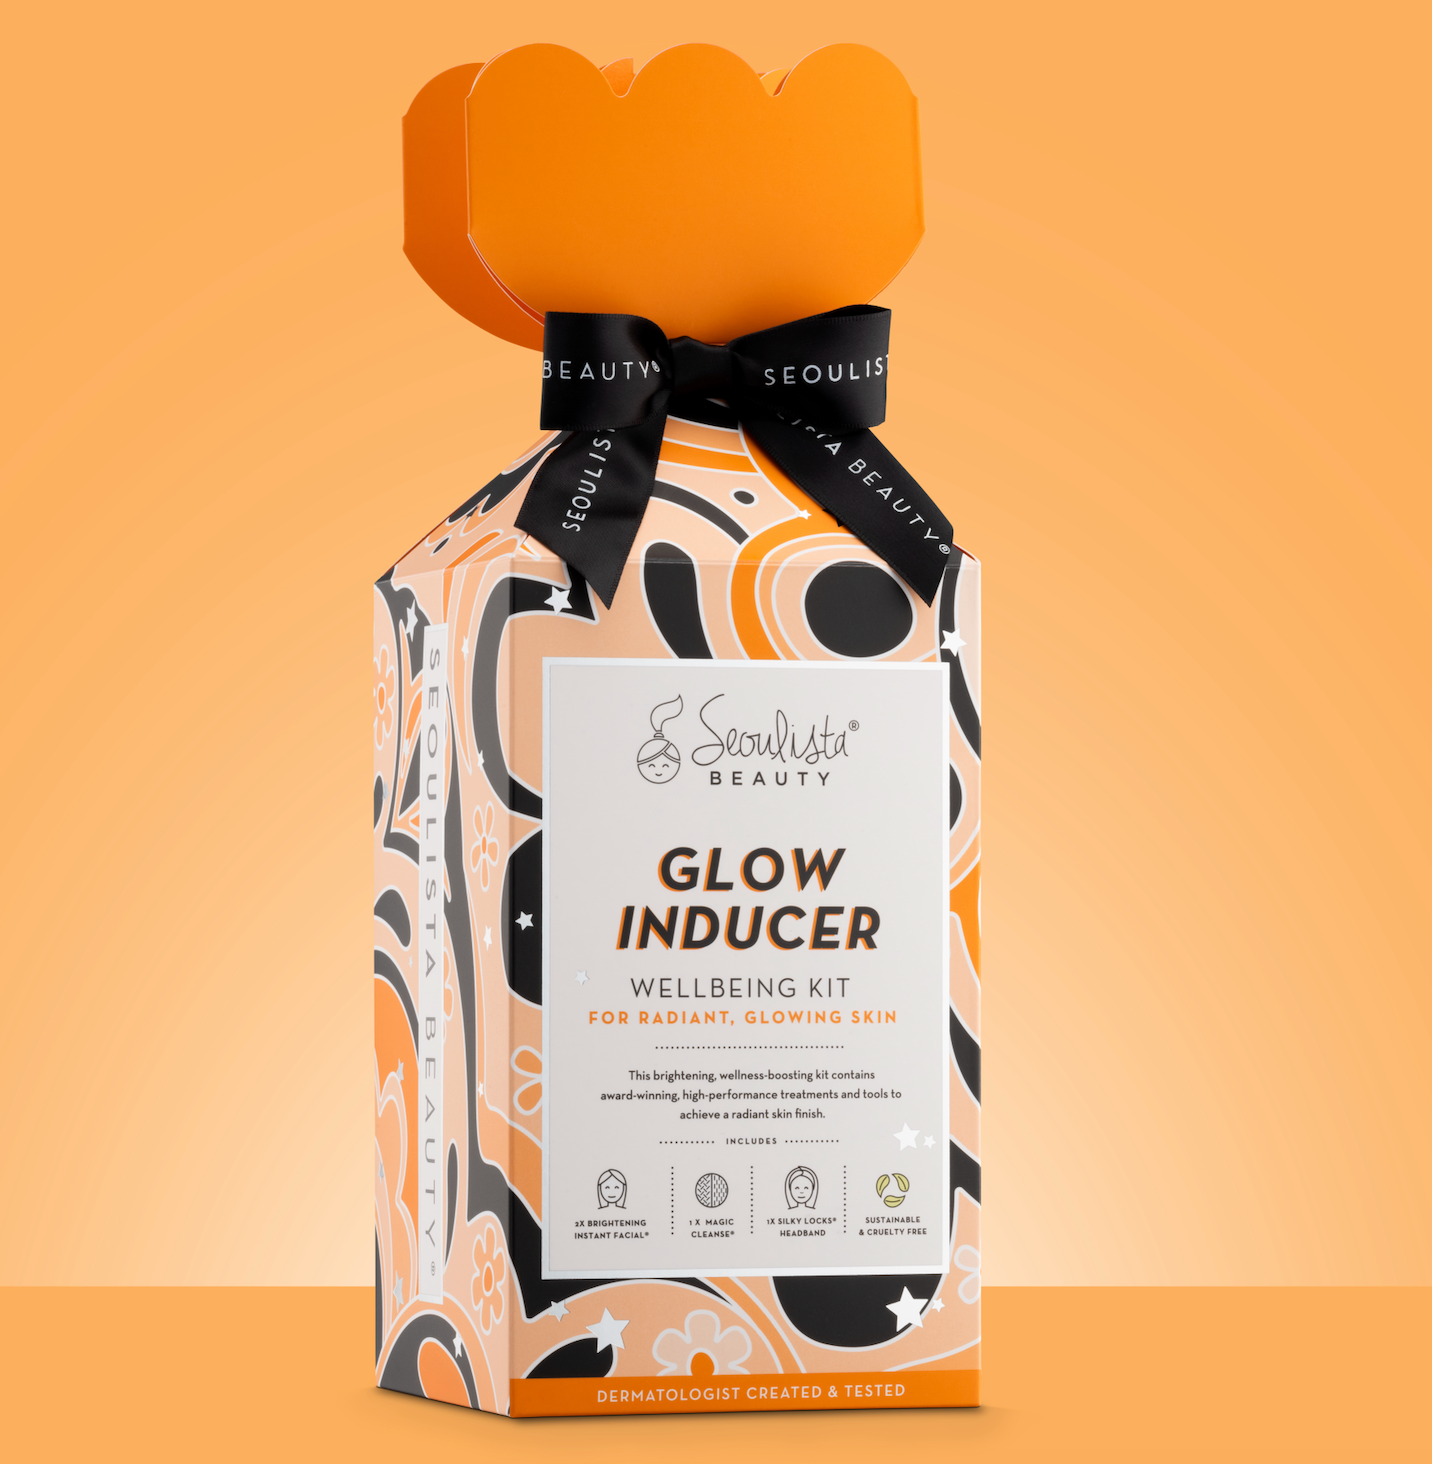 Glow Inducer Wellbeing Kit